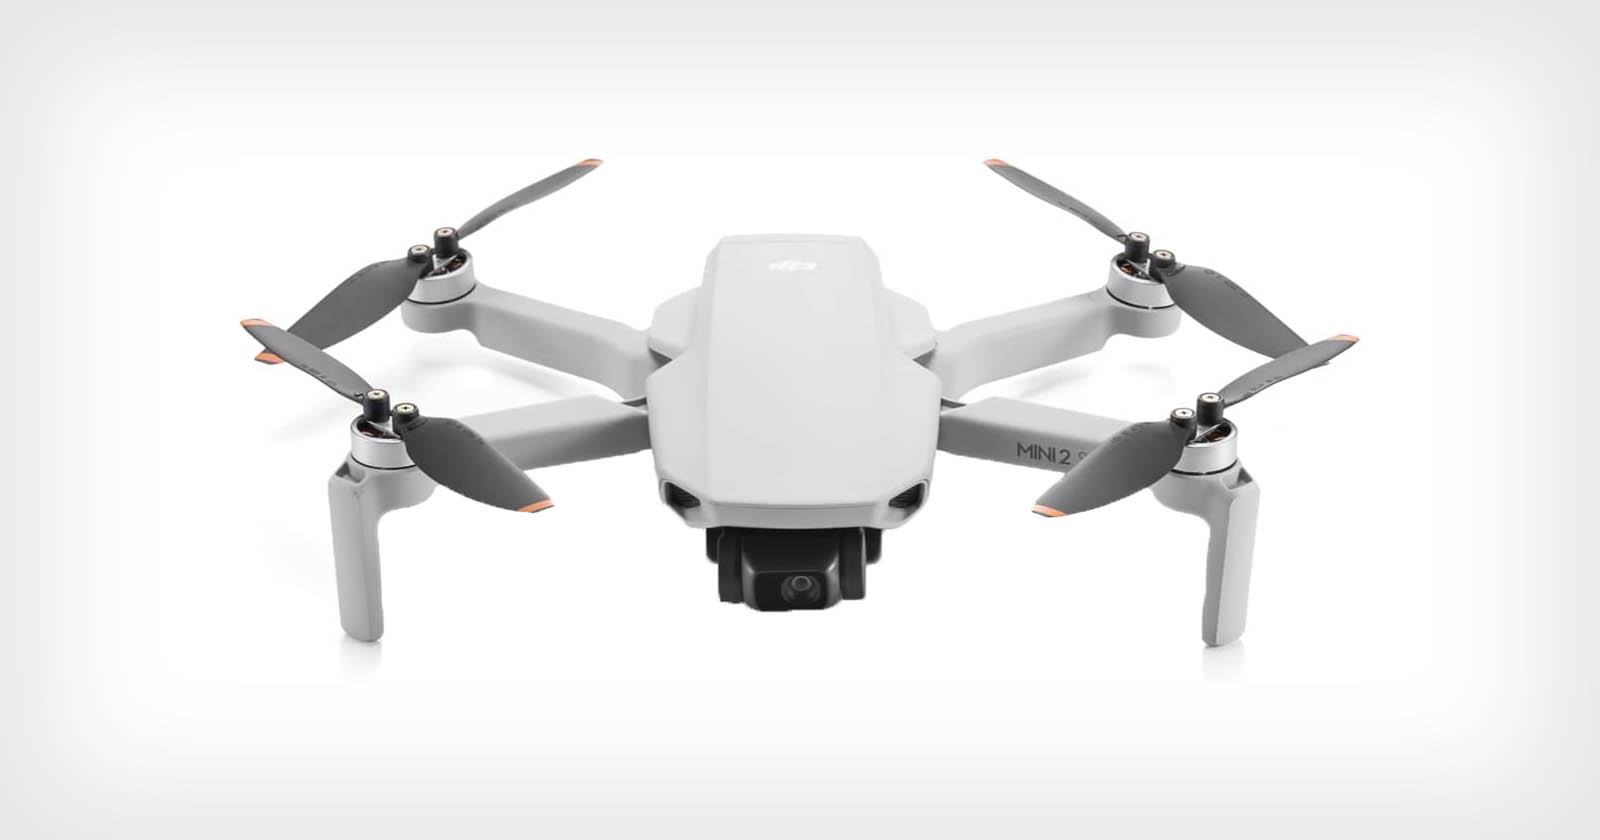 The DJI Wishlist: 6 Features We’d Like to See in Upcoming Drones